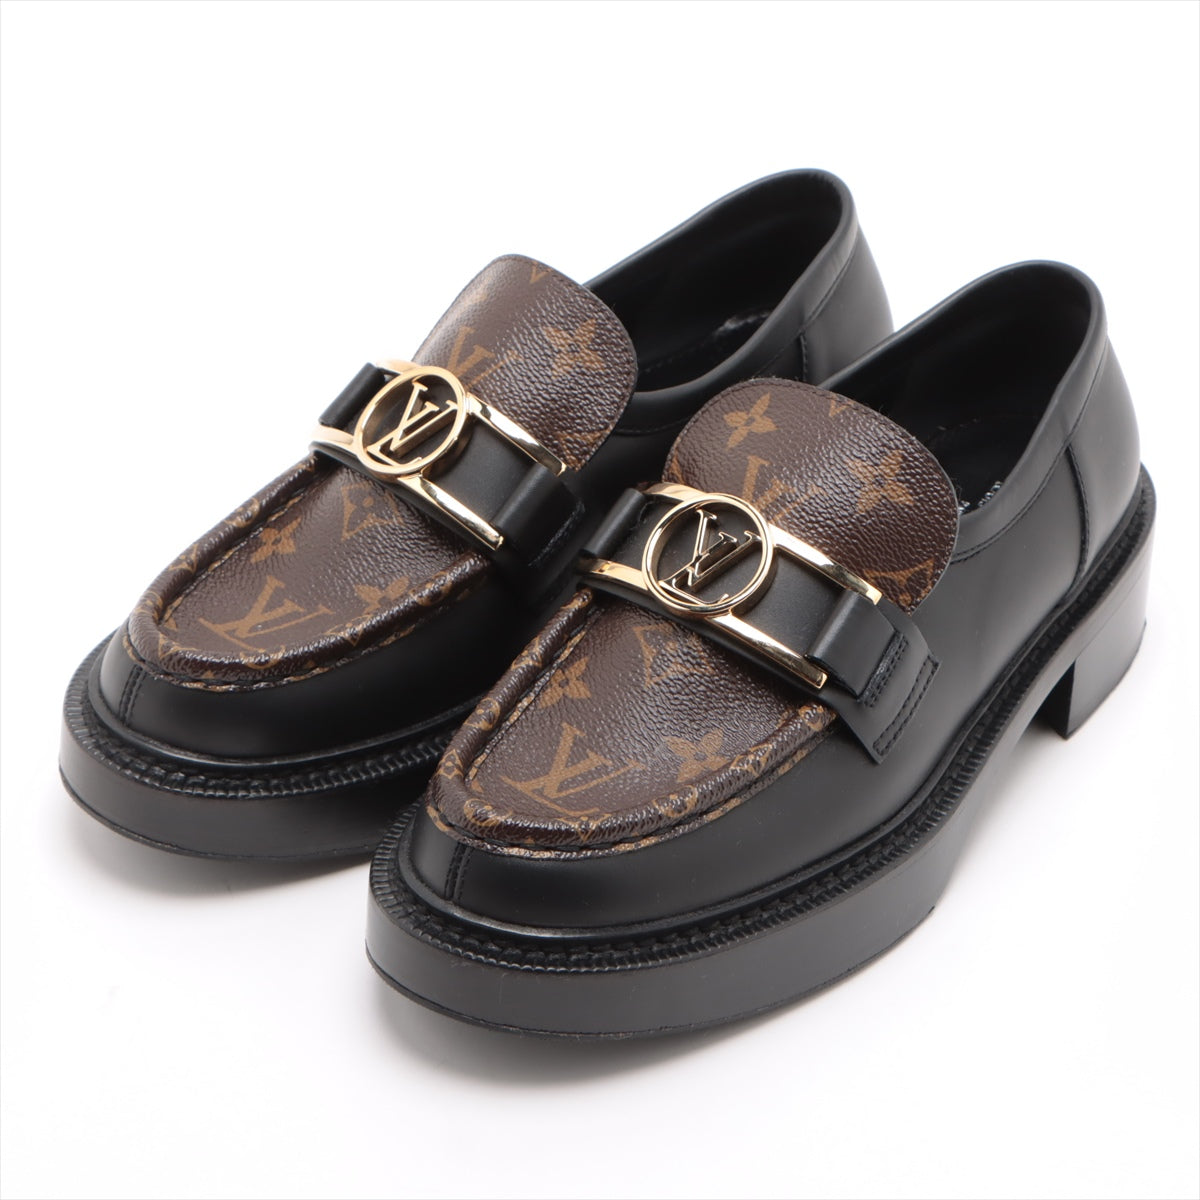 Louis Vuitton Academy Line 20 years Leather Loafer 38 Ladies' Black × Brown MA0230 Monogram